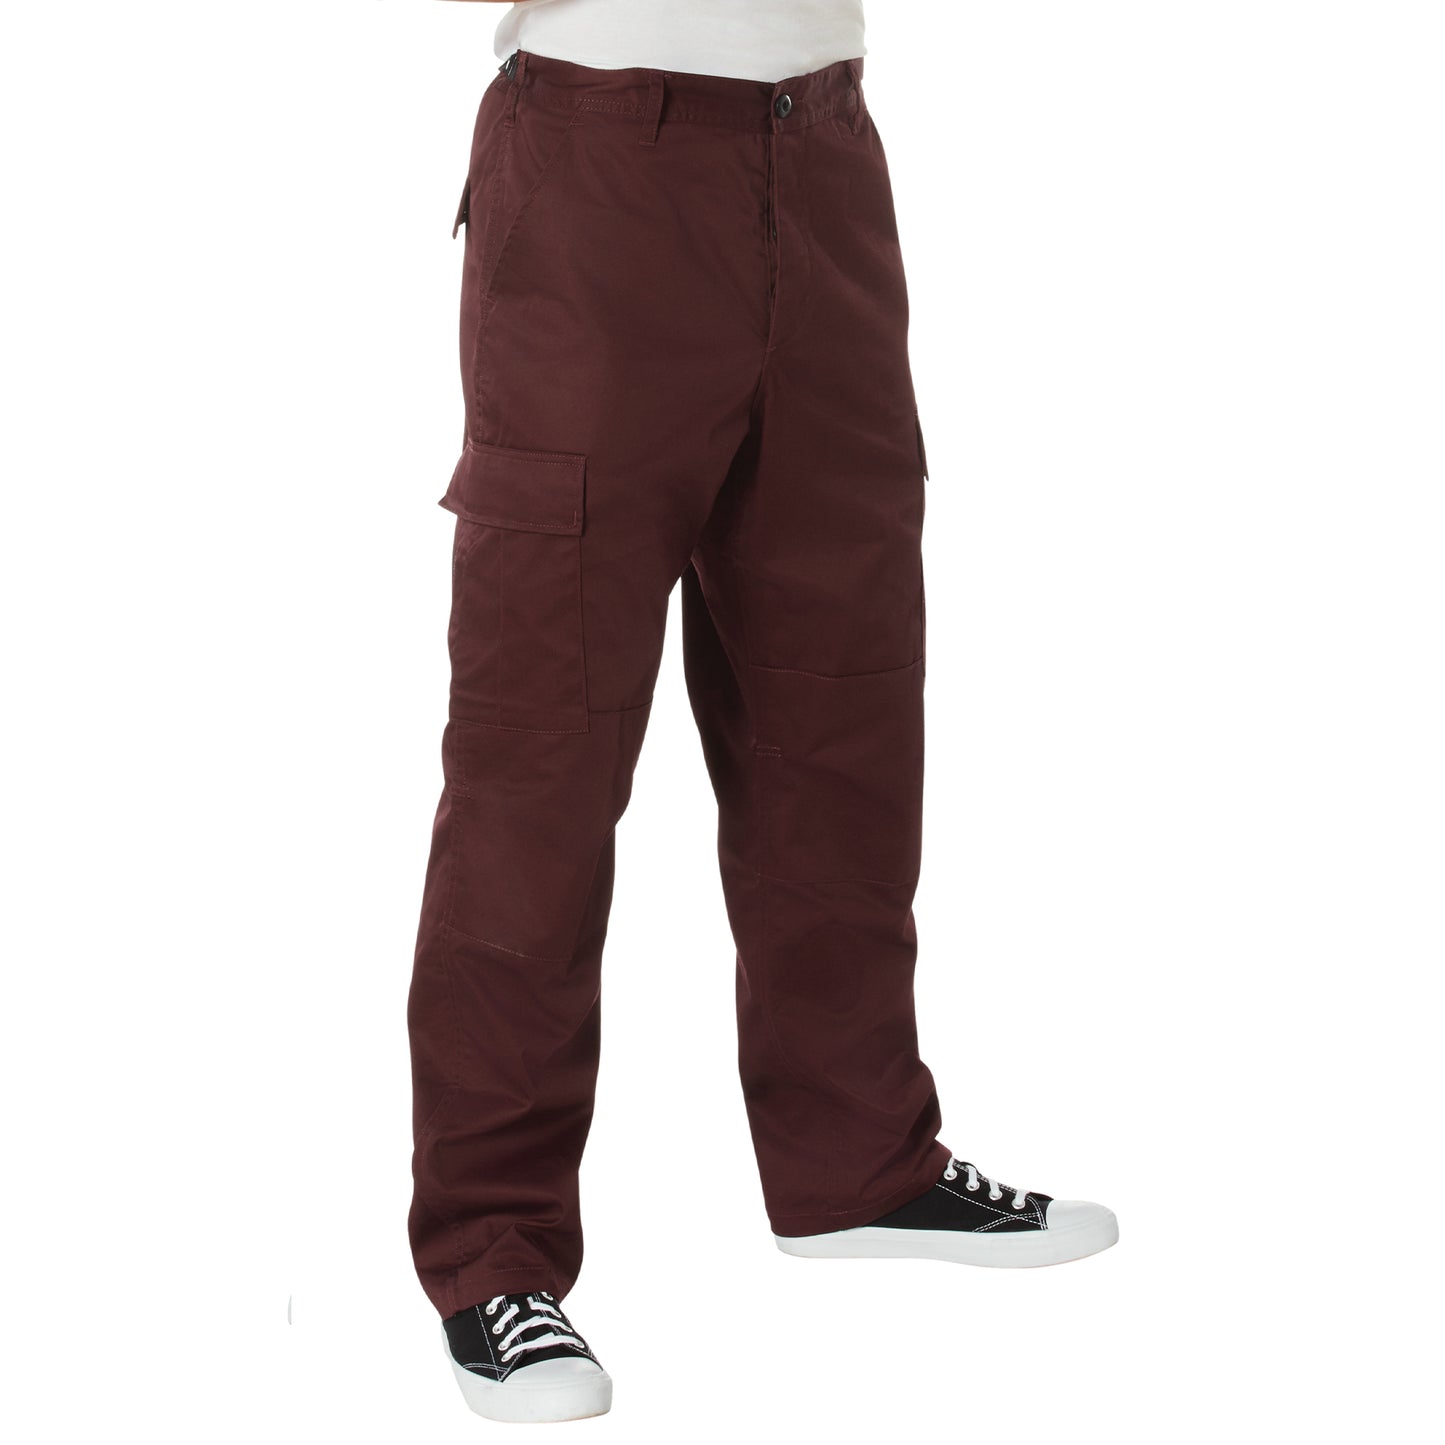 Rothco Tactical BDU Cargo Pants - Maroon Red